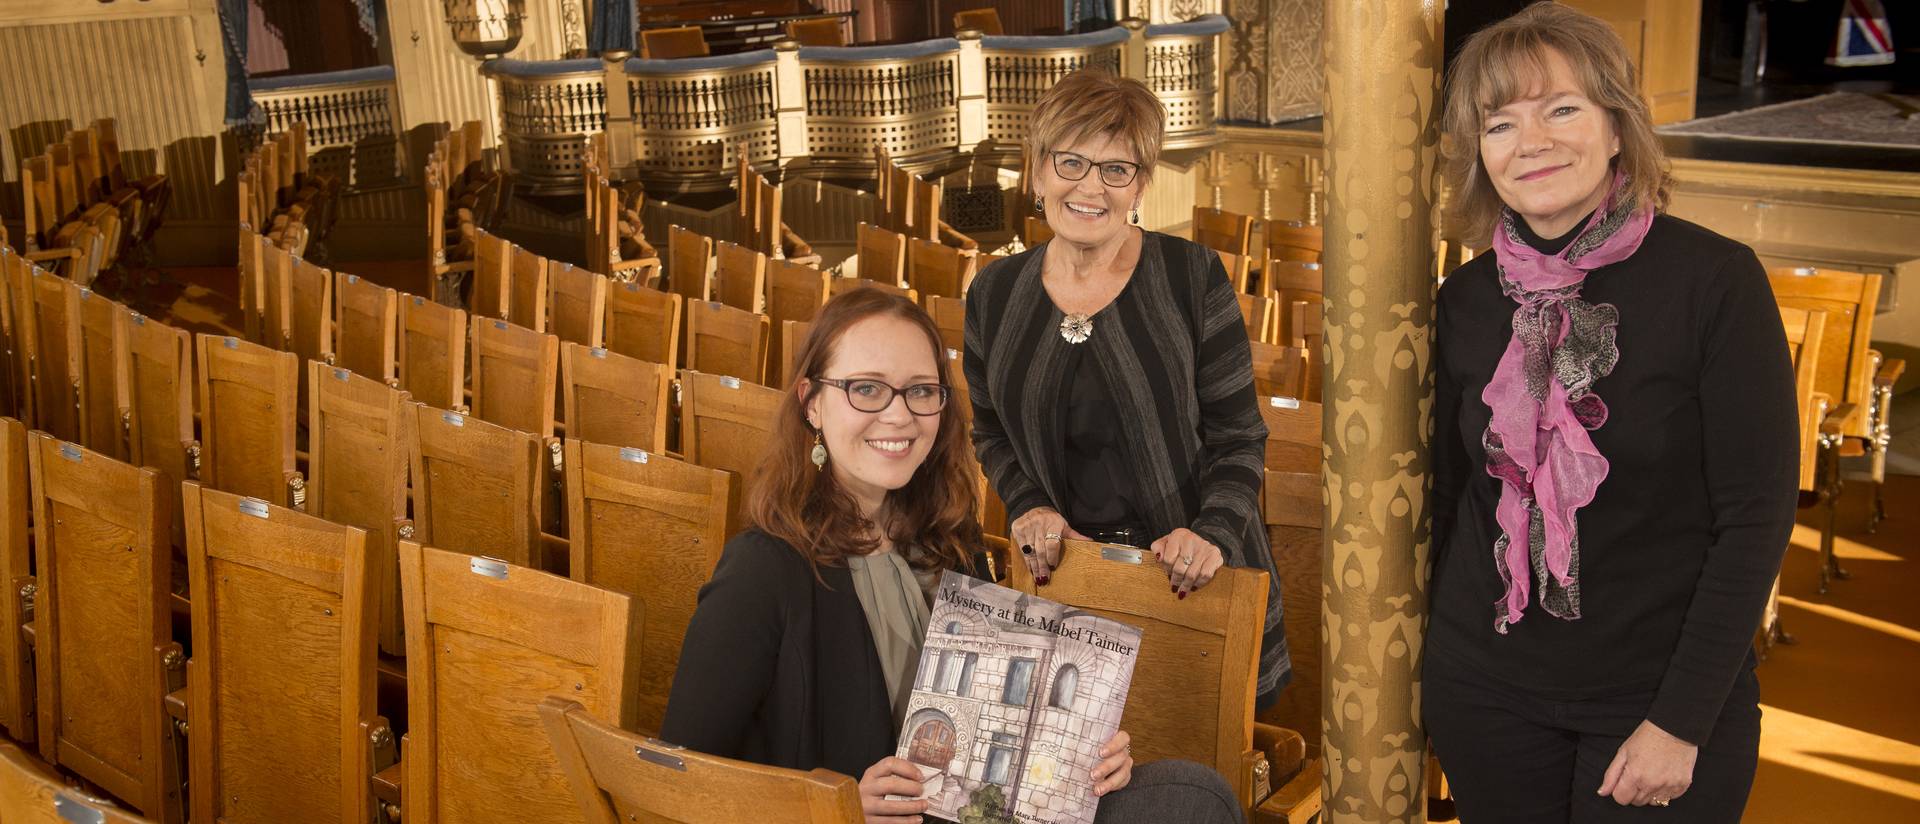 Mary Heimstead and Taylor Kysely pose with their book "Mystery at the Mabel Tainter" with another woman in the Mabel Tainter Center for the Arts in Menomonie, WI.